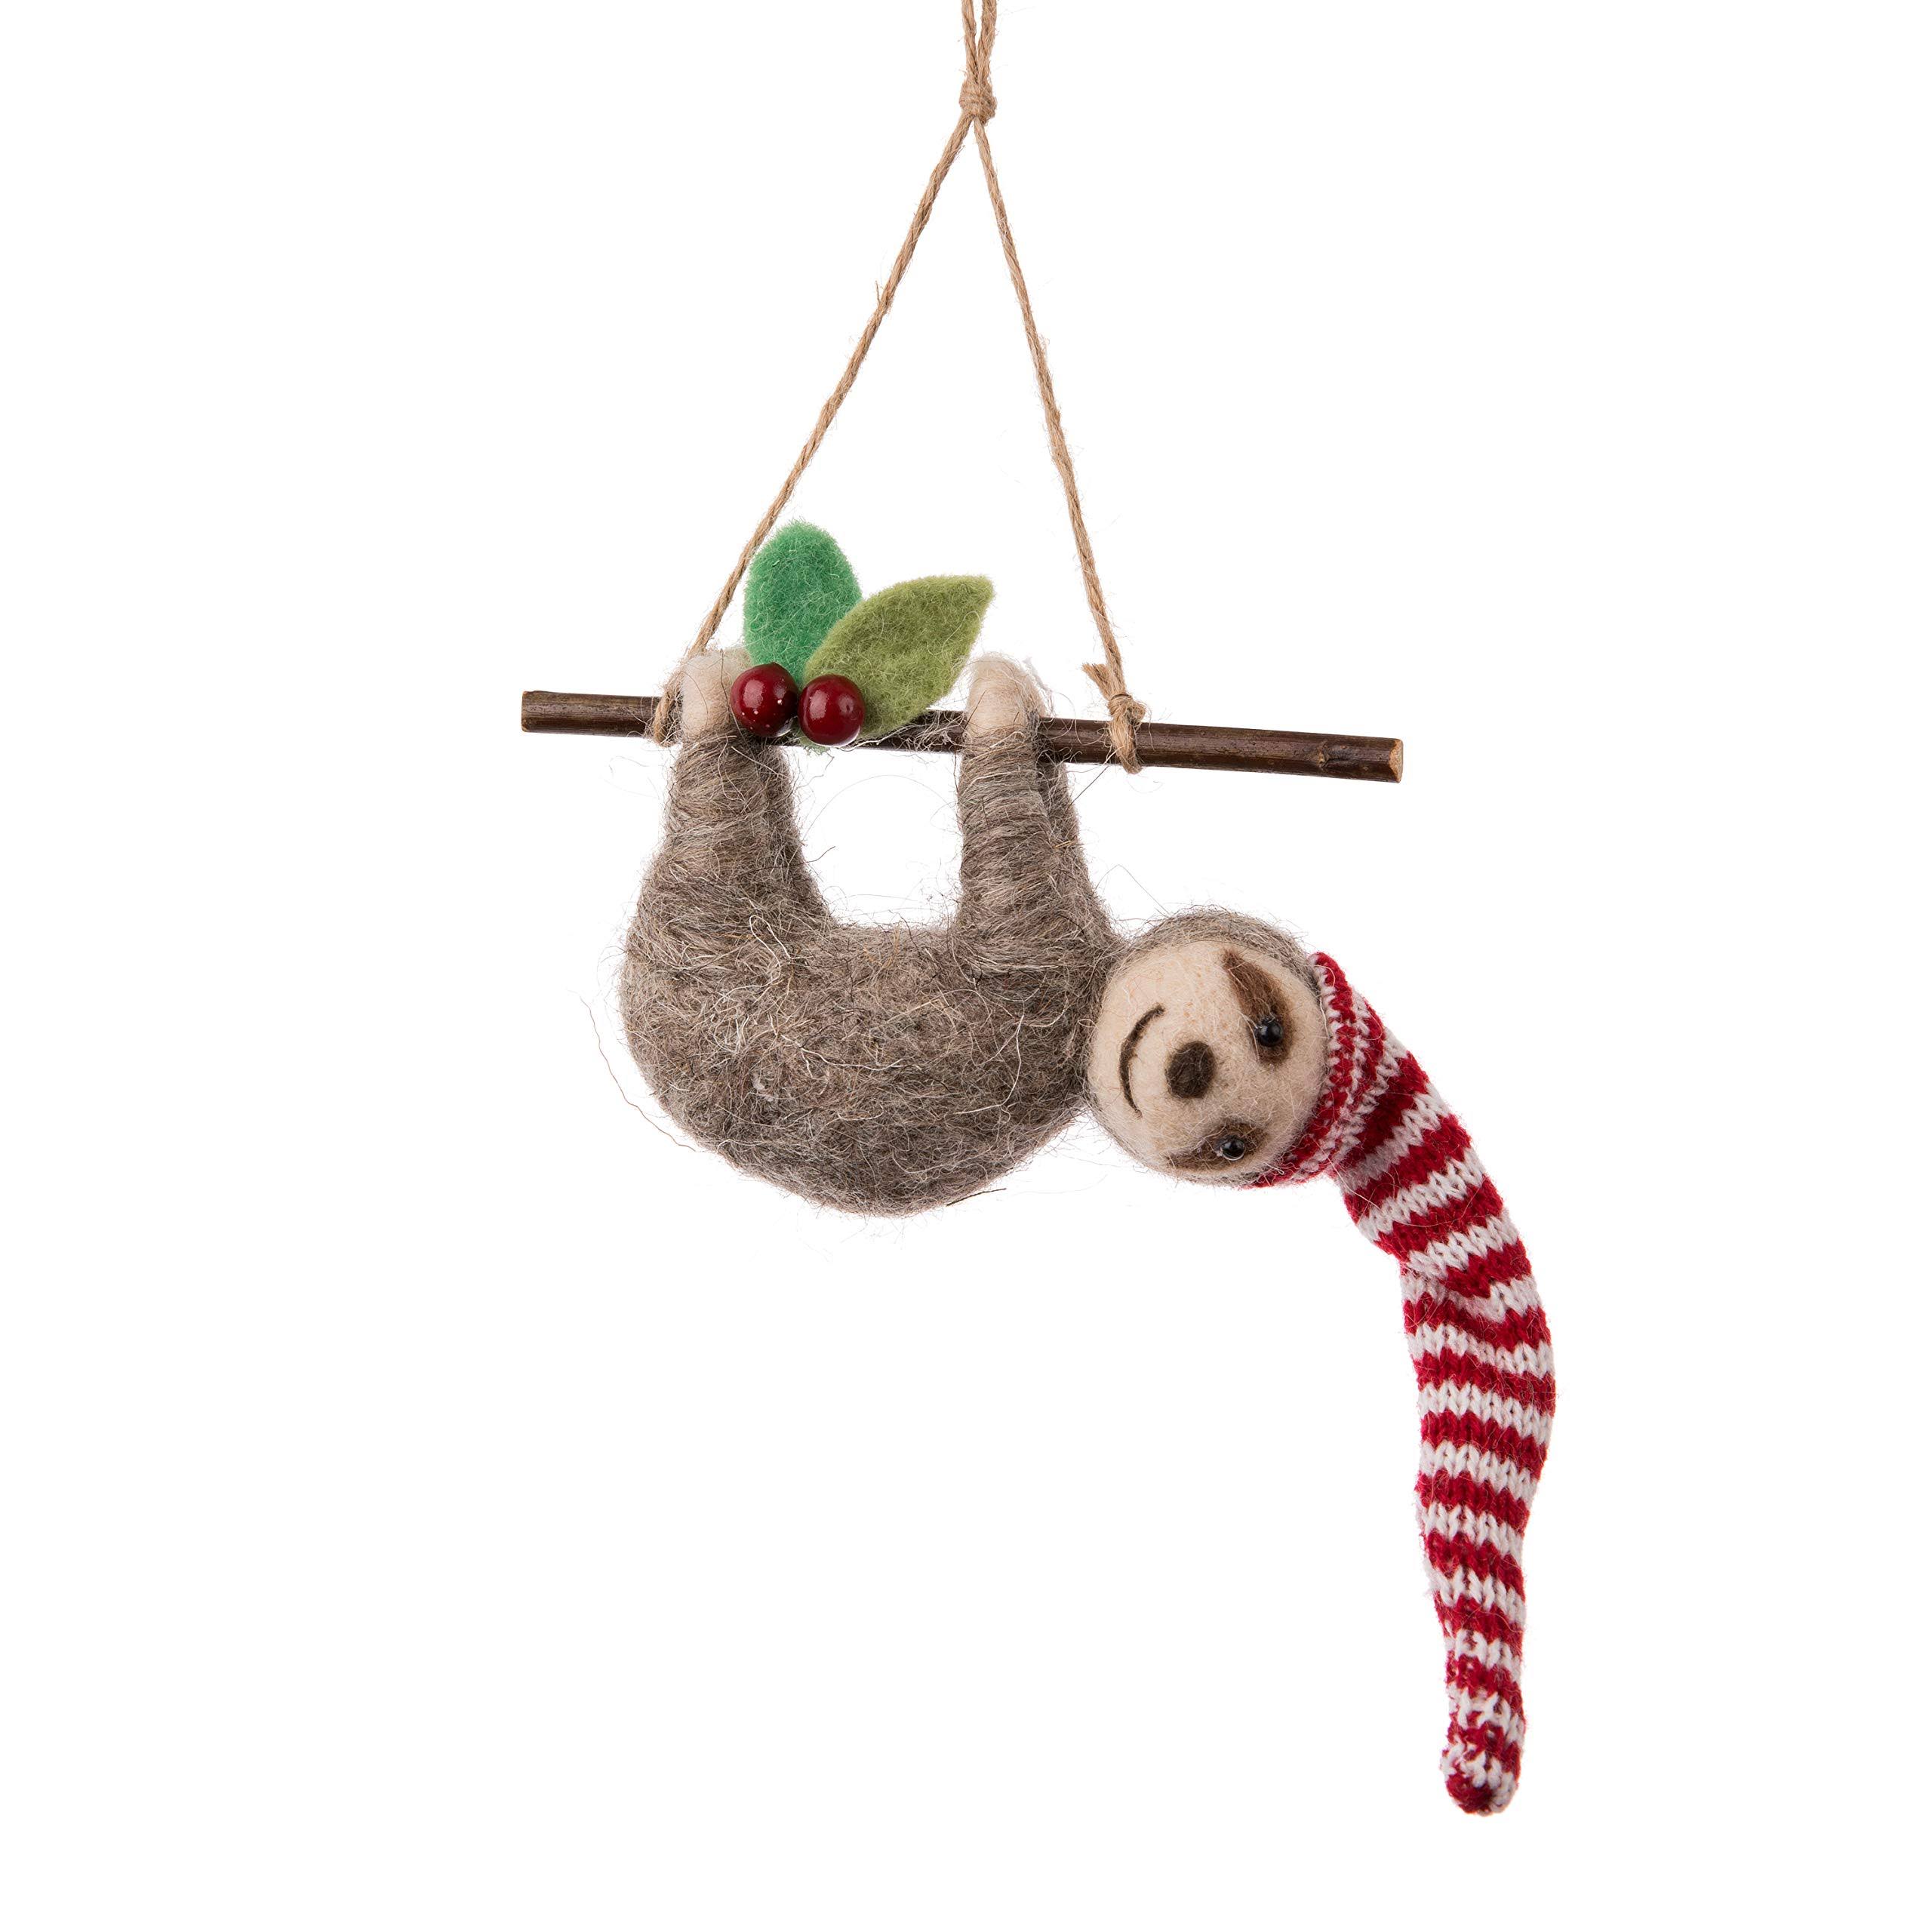 Abbott Sloth On Branch Ornament - Brown/Red, 6"